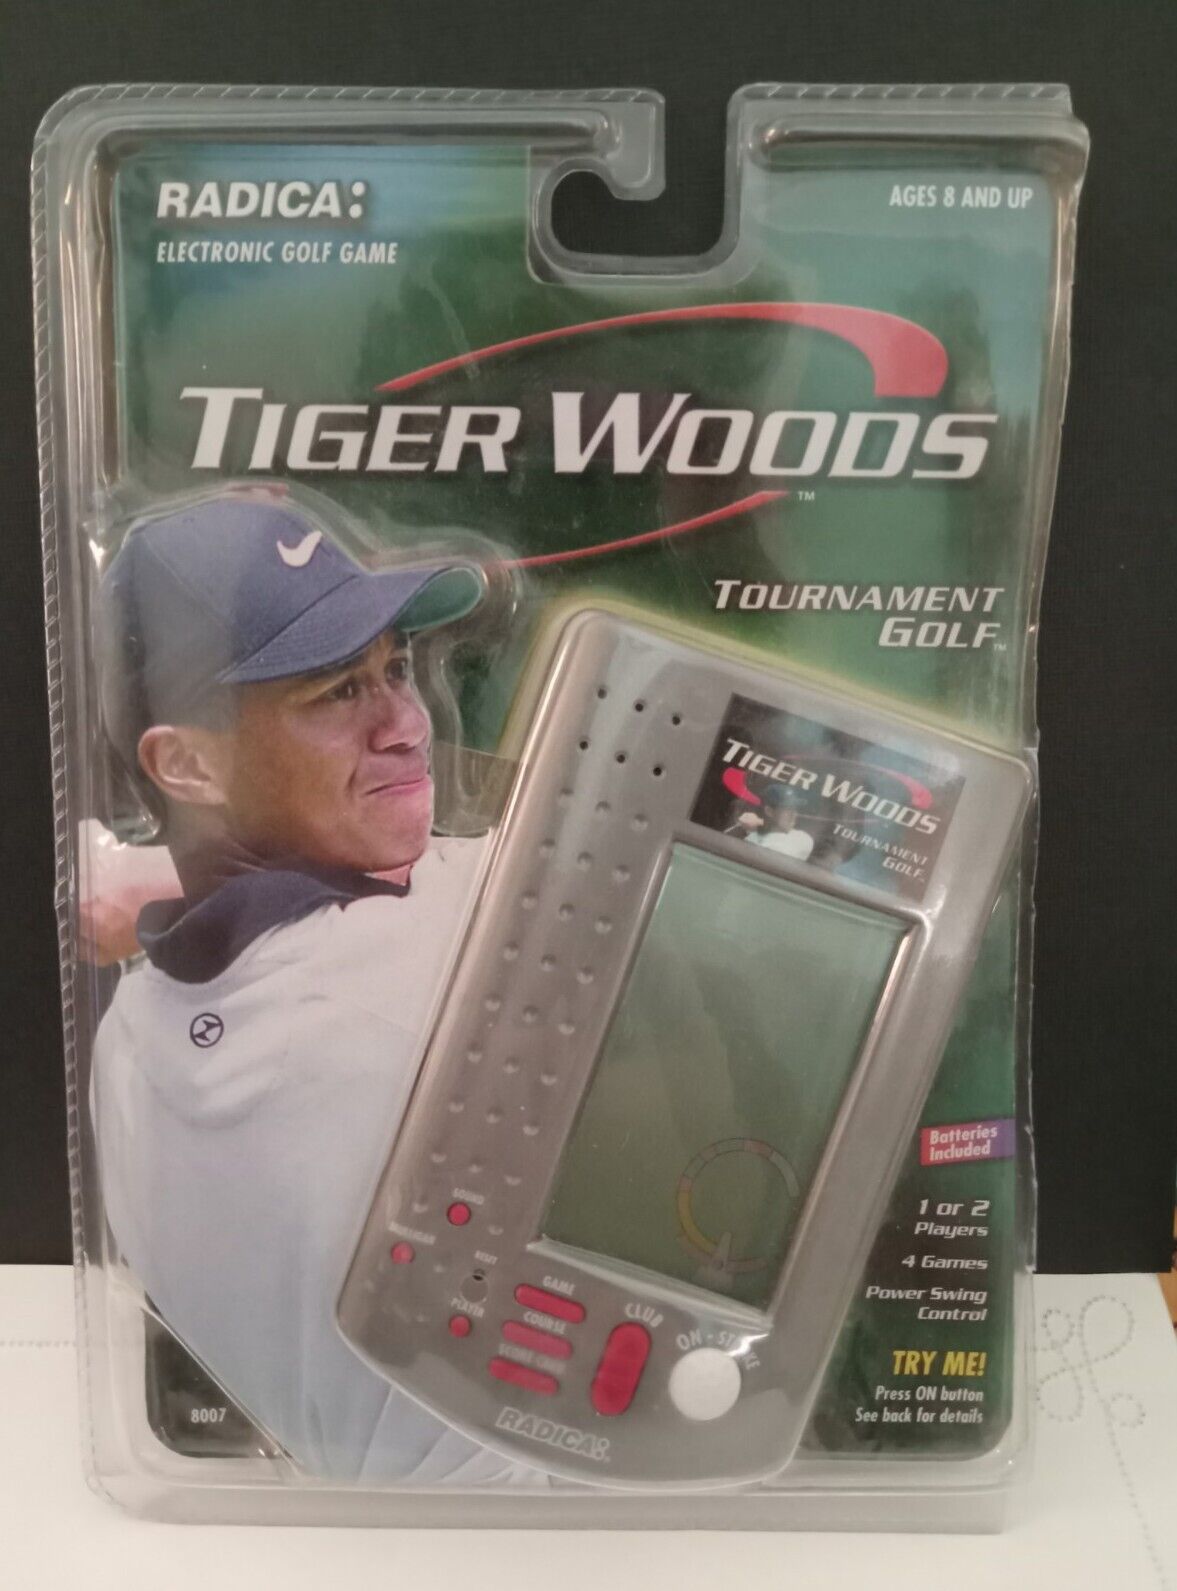 RADICA TIGER WOODS TOURNAMENT GOLF ELECTRONIC GAME #8007 New VTG READ travel